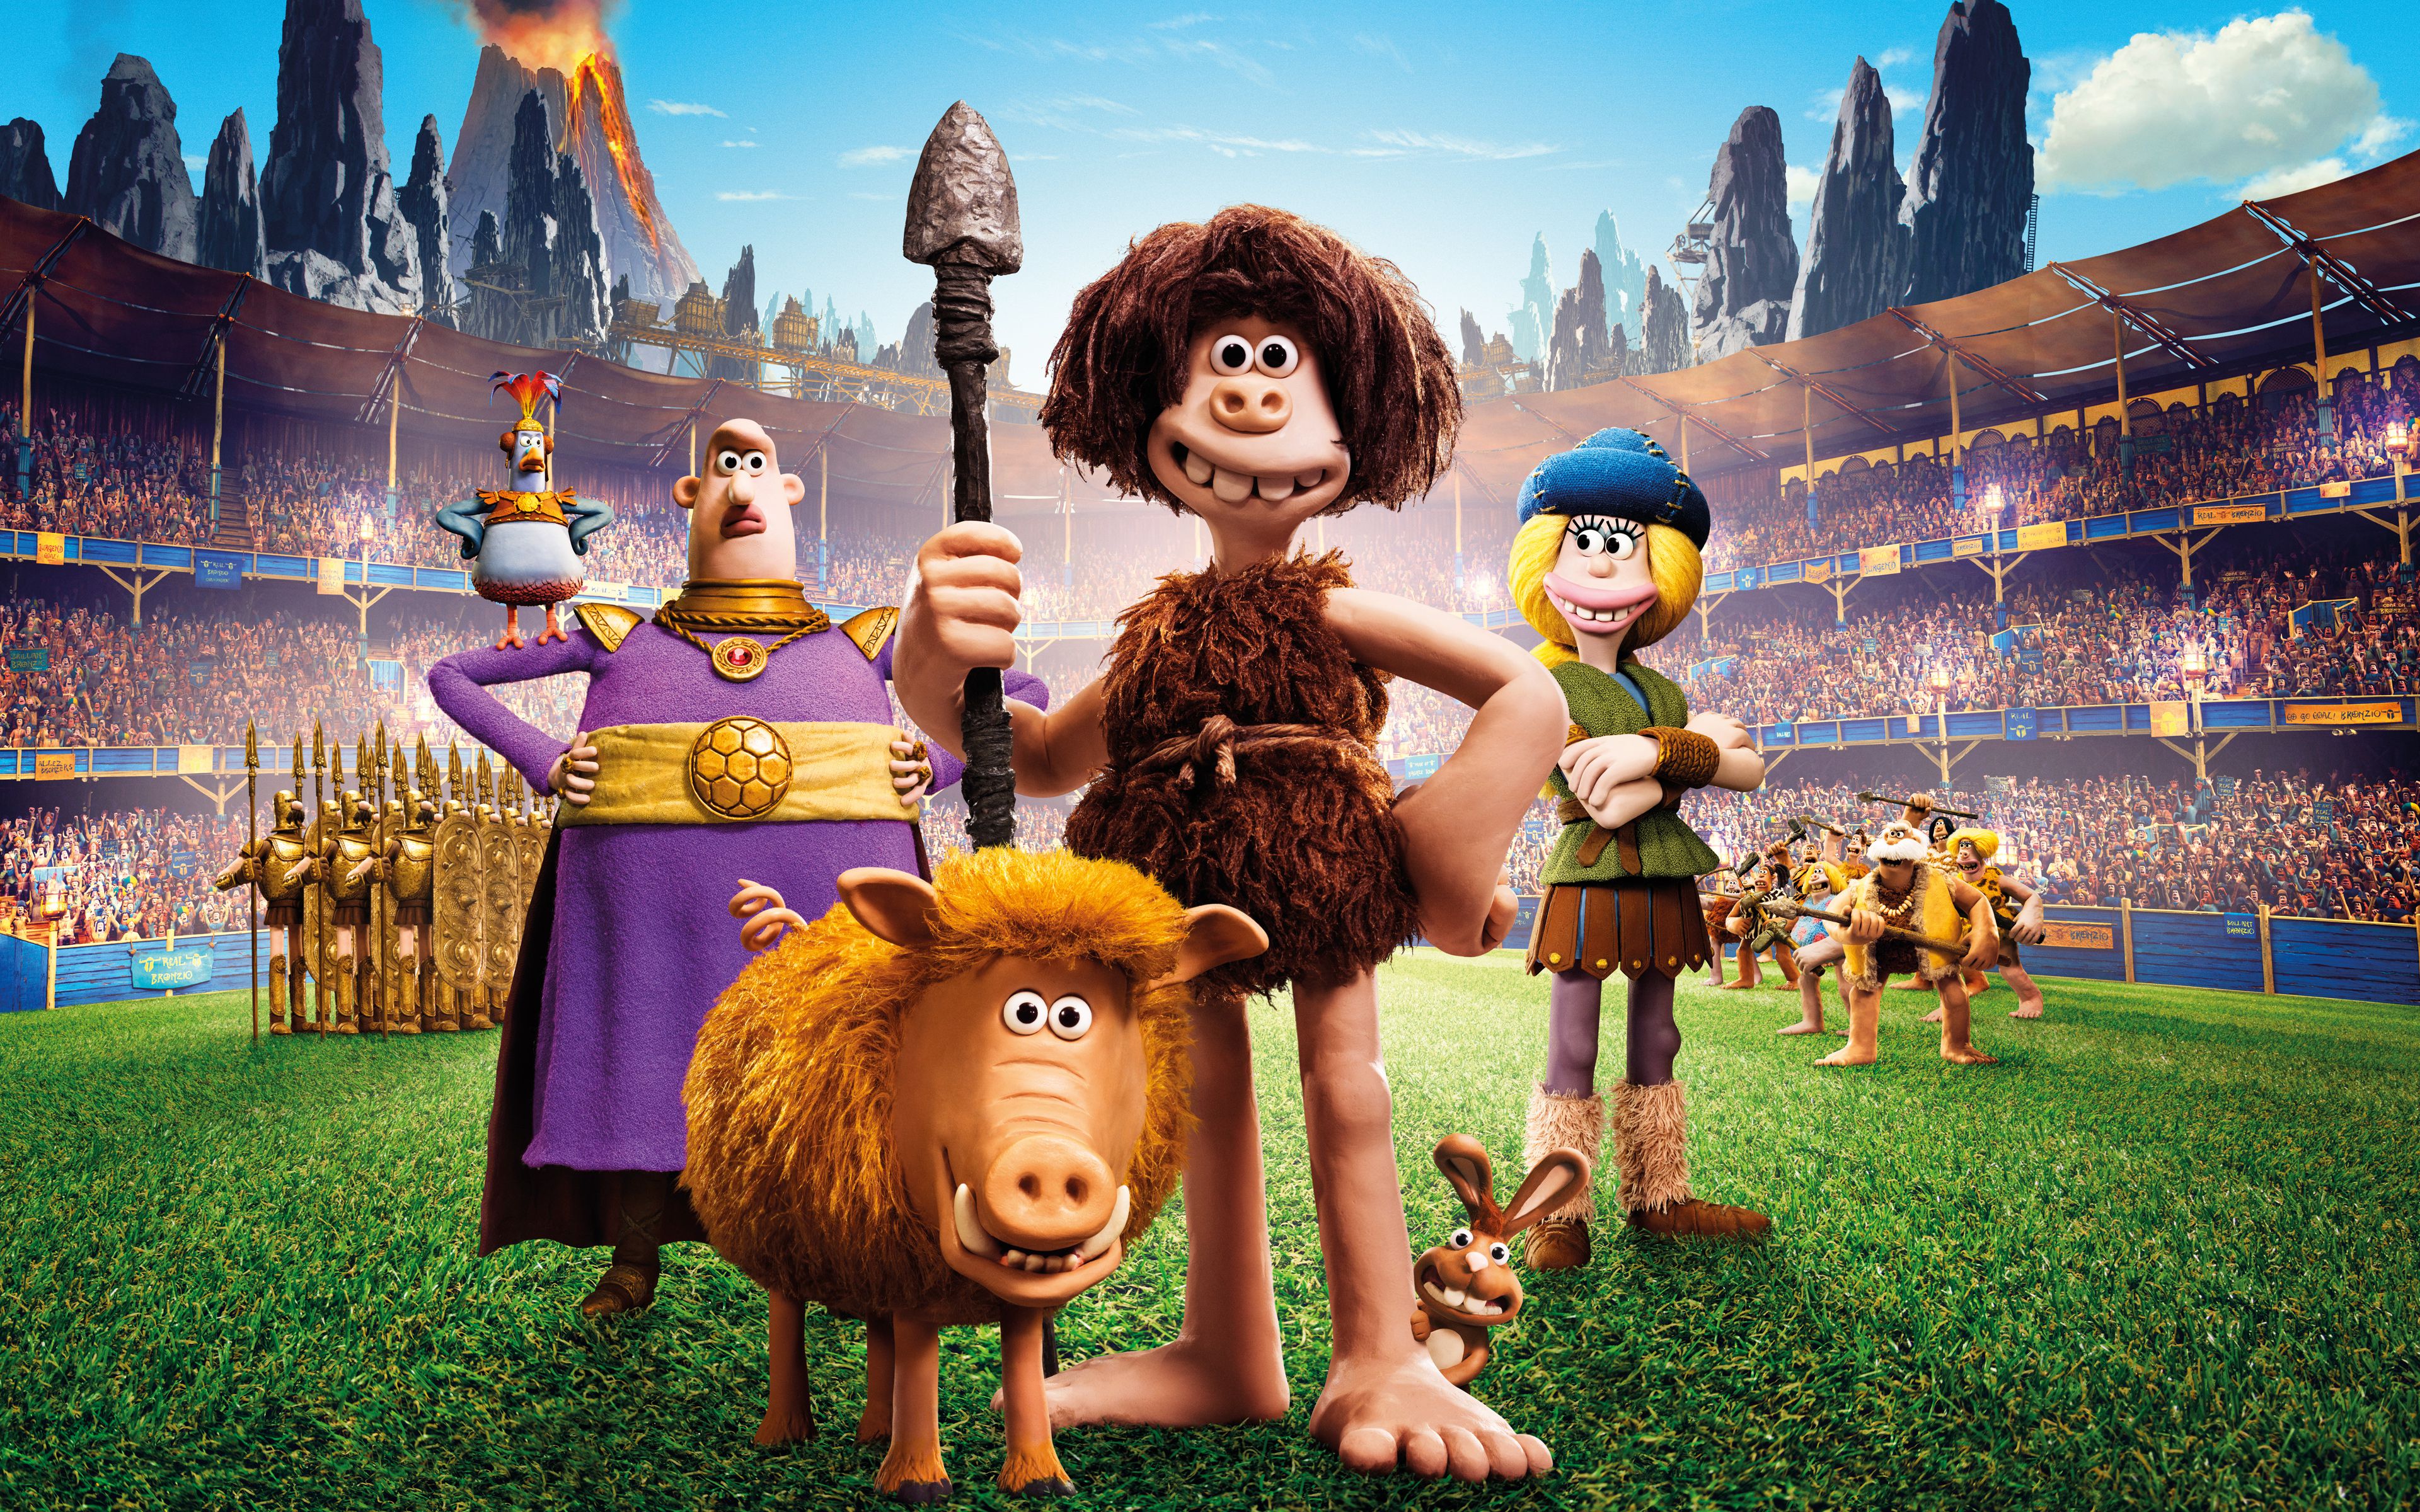 Early Man Animation 2018 Poster Wallpapers